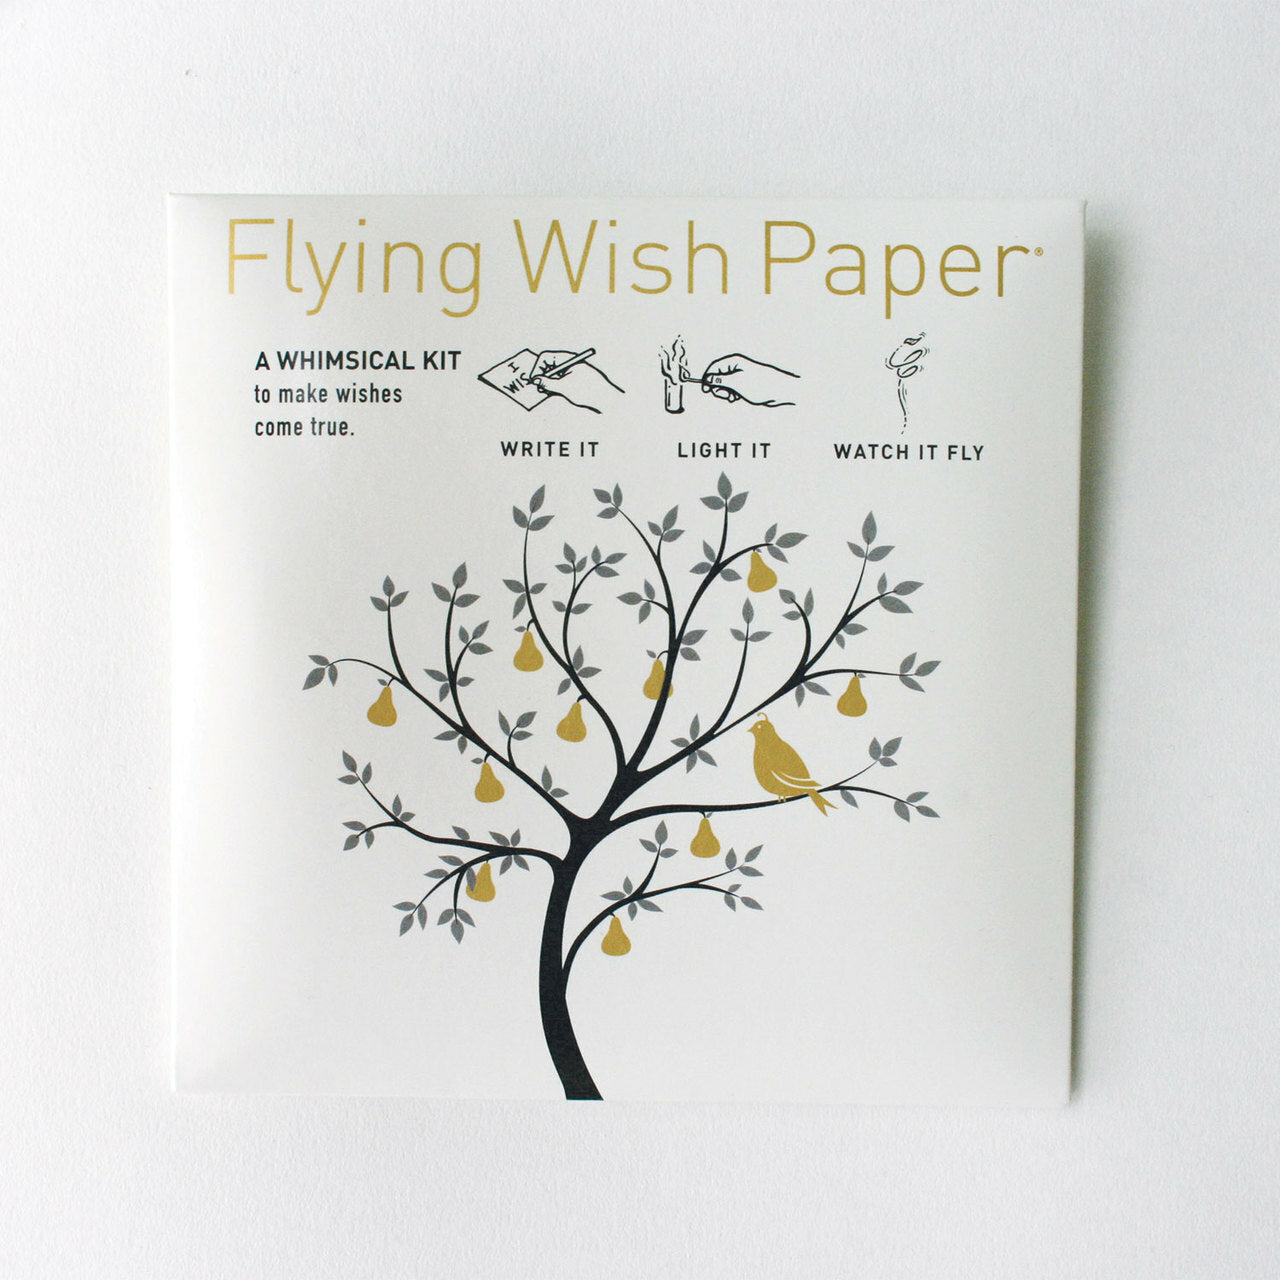 Flying Wish Paper Pear Tree kit.  Watch your wishes take flight with Flying Wish Paper!